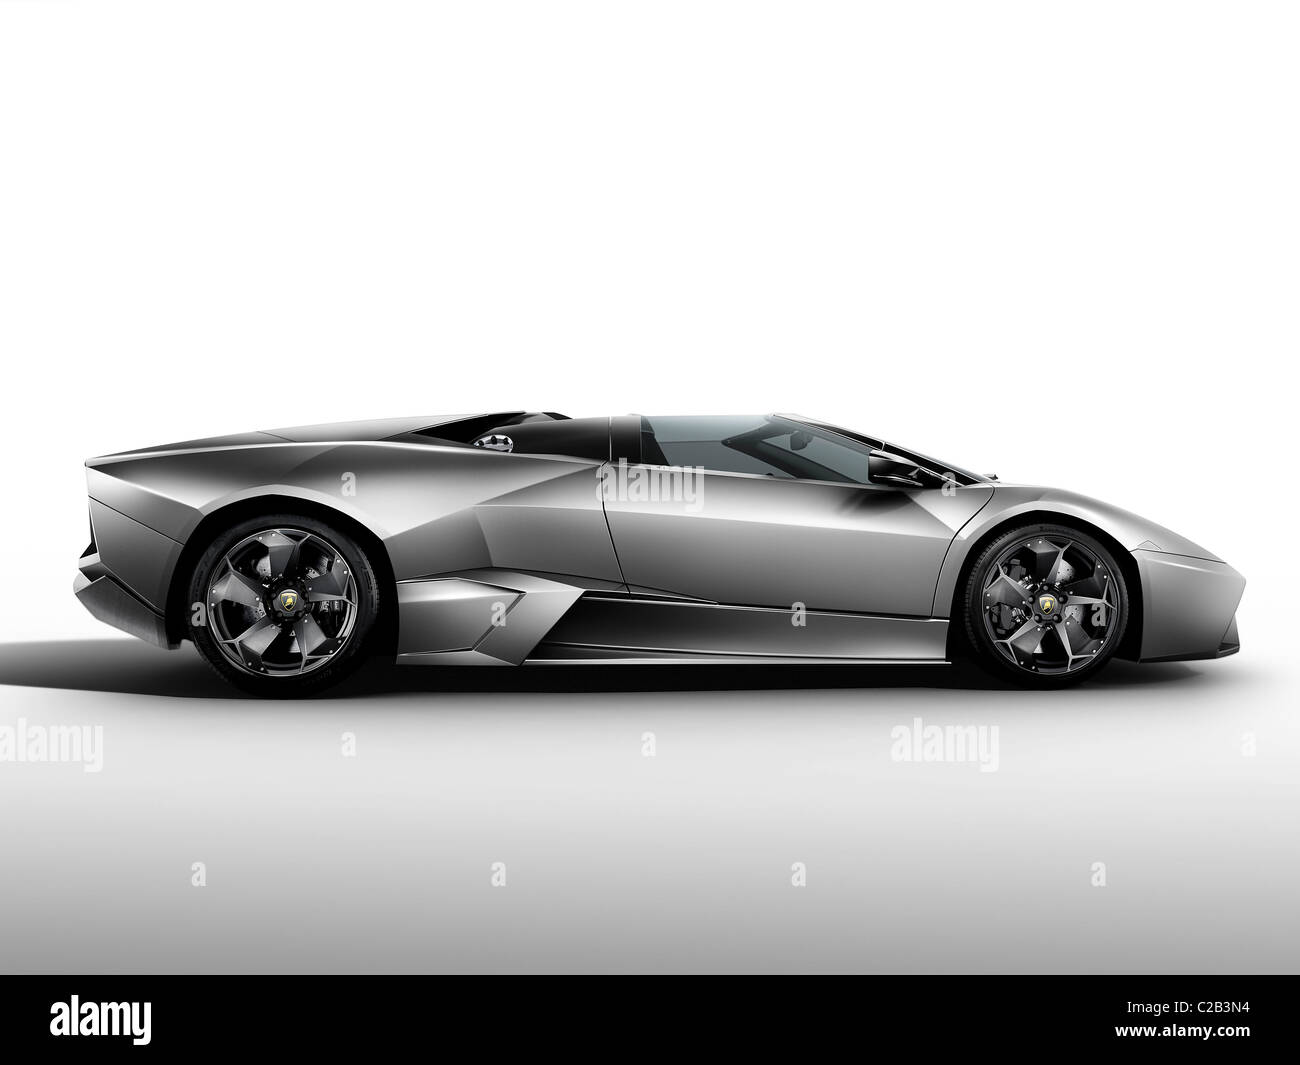 Lamborghini unveils the Reventon Roadster. The 6.5 liter twelve-cylinder generates 493 kW (670 PS), catapulting the Roadster Stock Photo